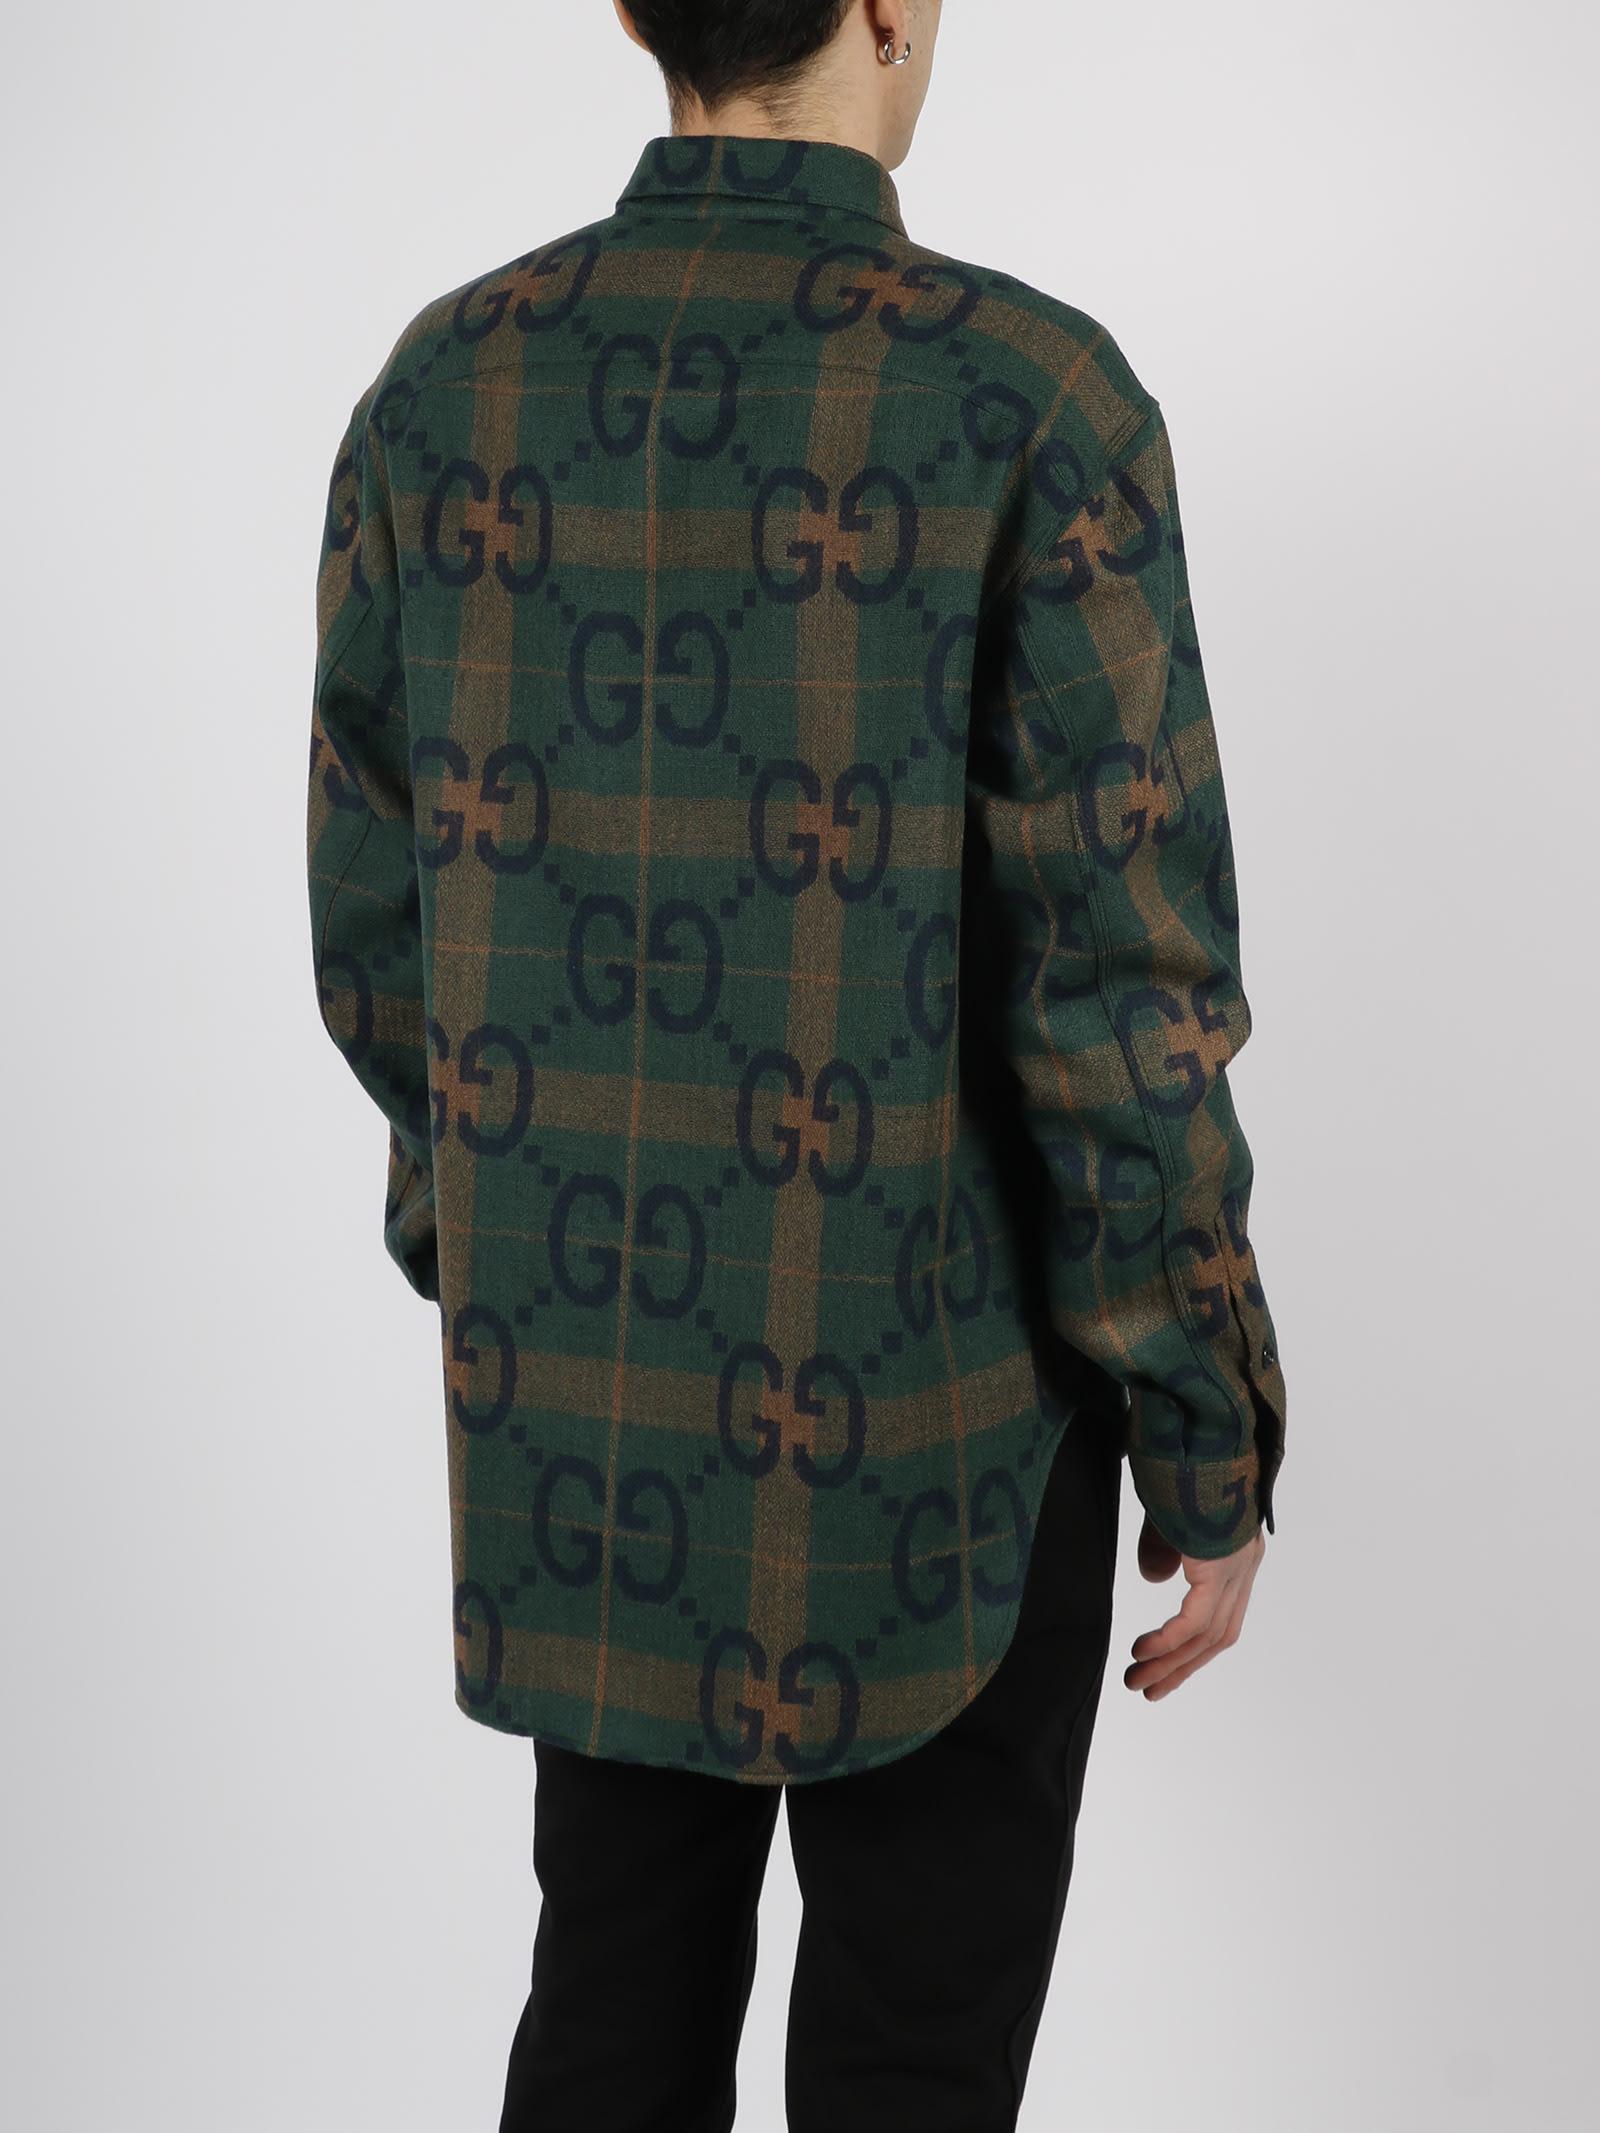 Gucci Jumbo Gg Check Wool Shirt in Green for Men | Lyst